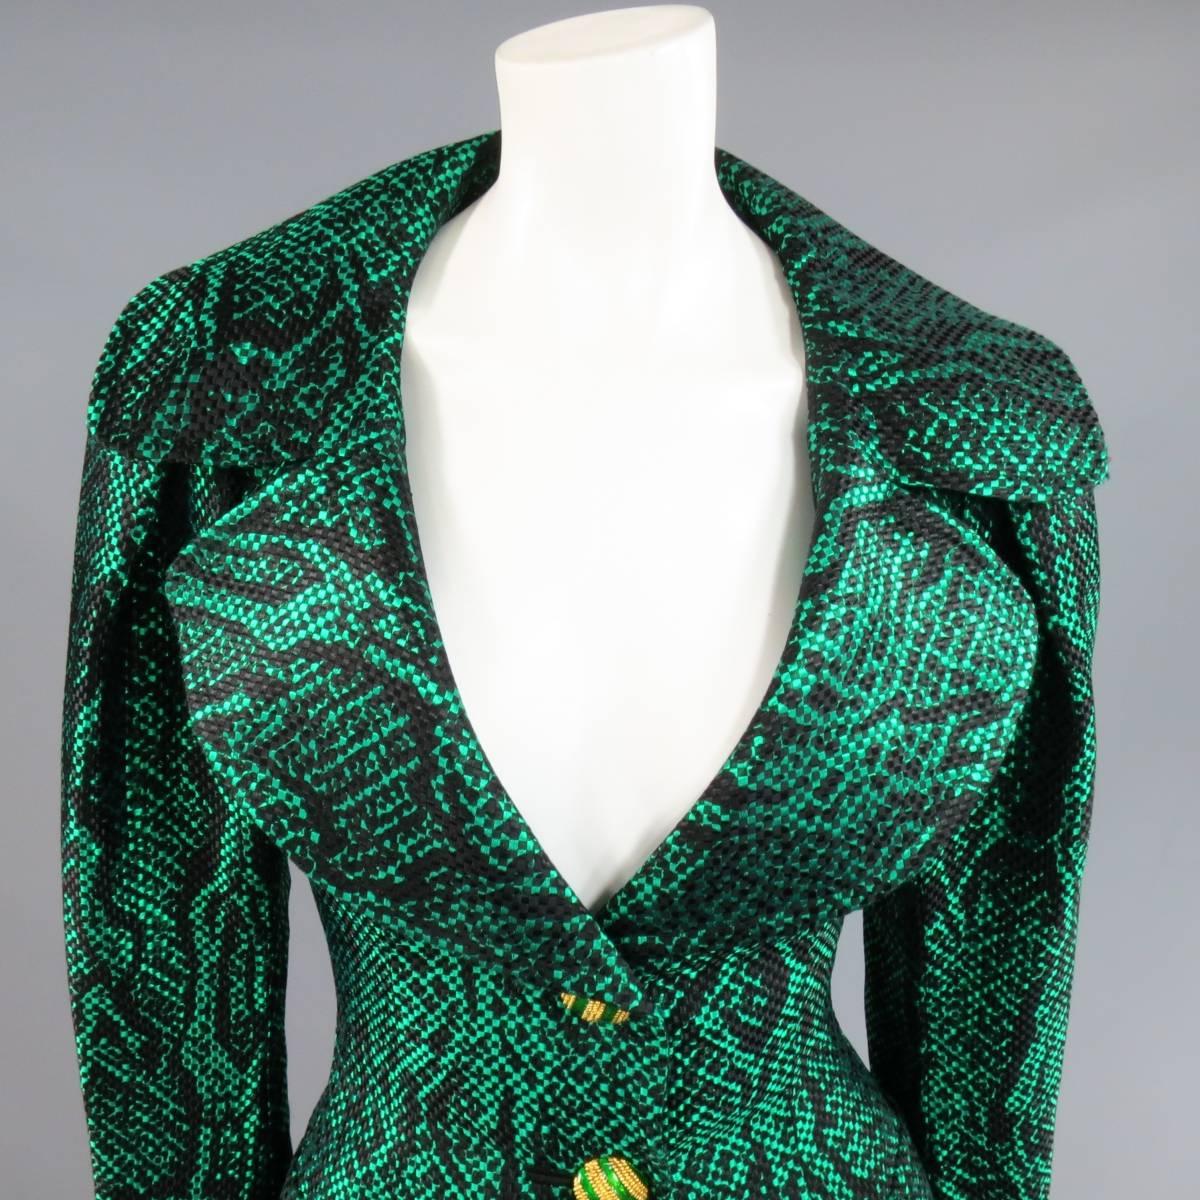 This stunning vintage YVES SAINT LAURENT Rive Gauche jacket comes in a structured emerald green and black checkered textured python snake print jacquard material and features a wide lapel, pleated puff shoulder sleeves with cuff, hourglass